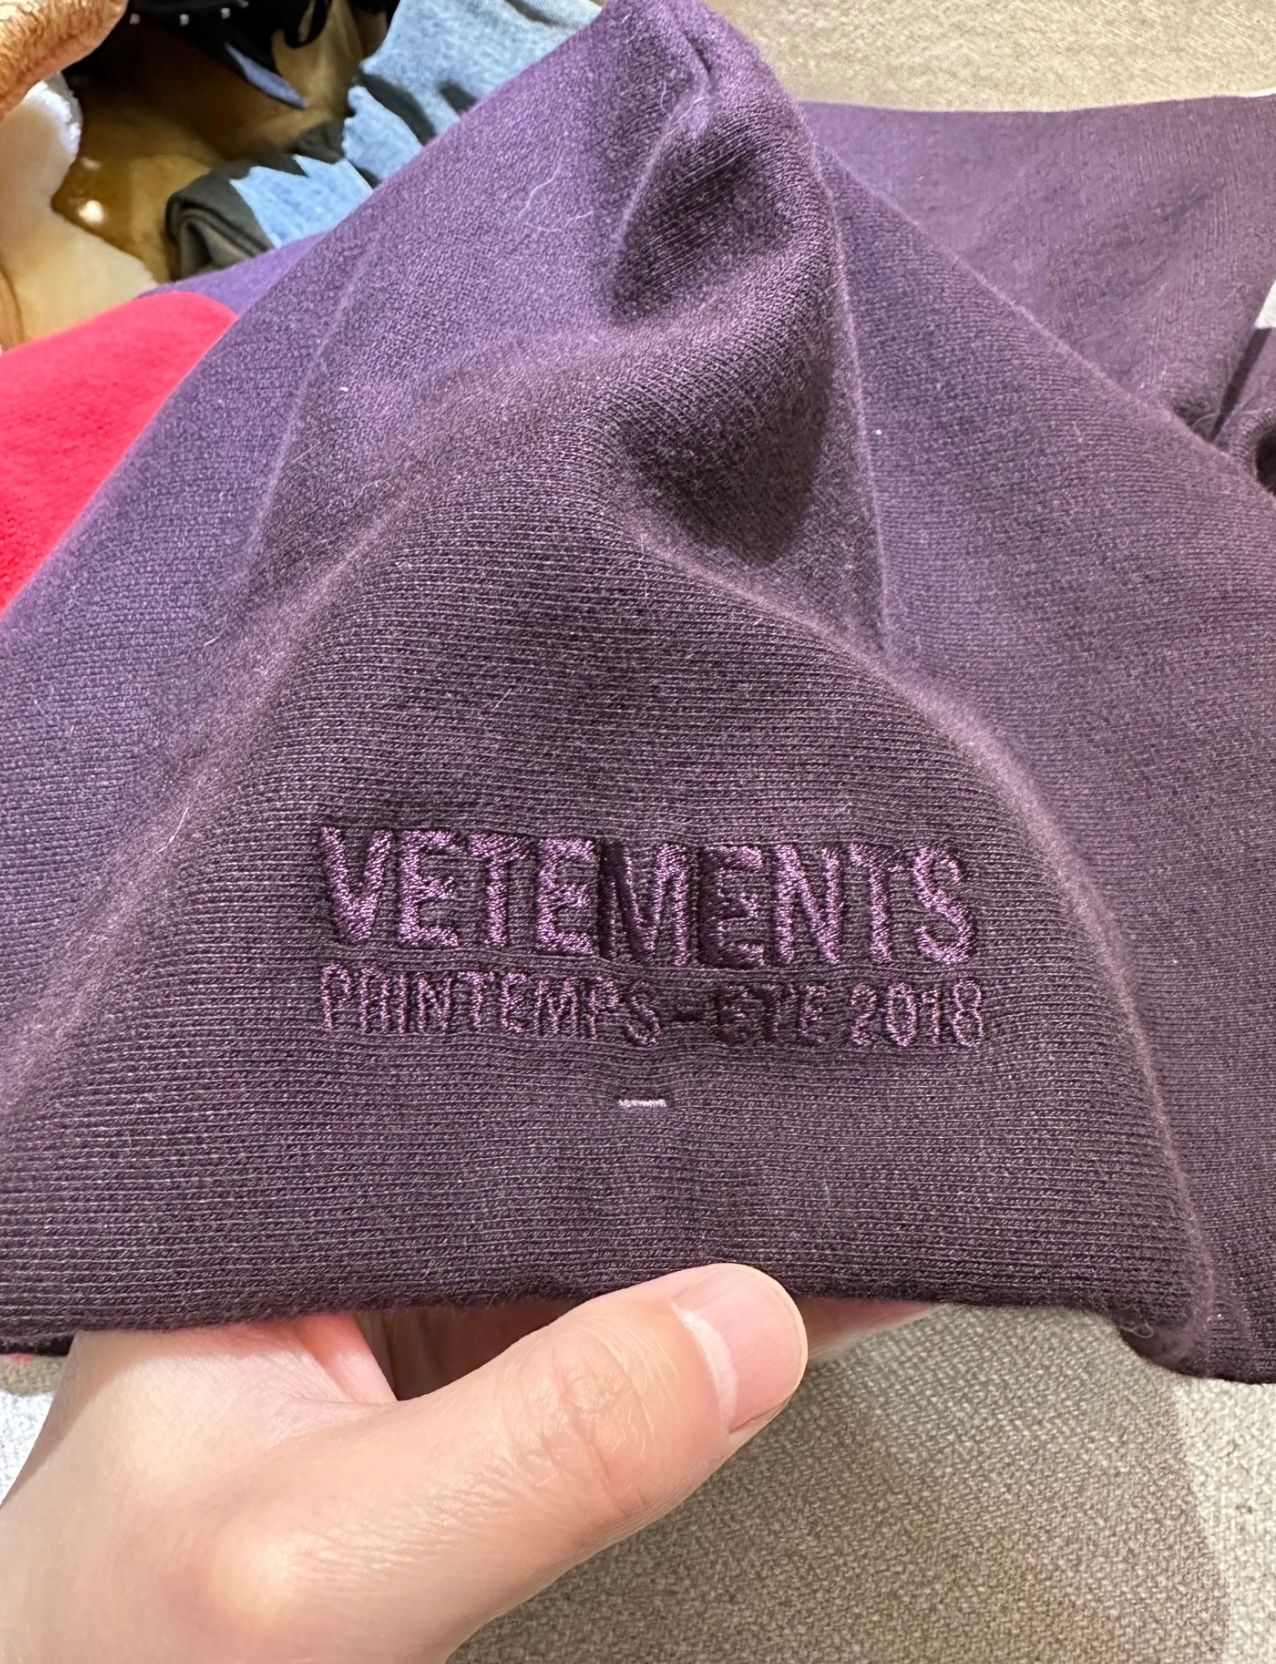 Vetements SS18 reconstructed coming soon Hoodie M - 4